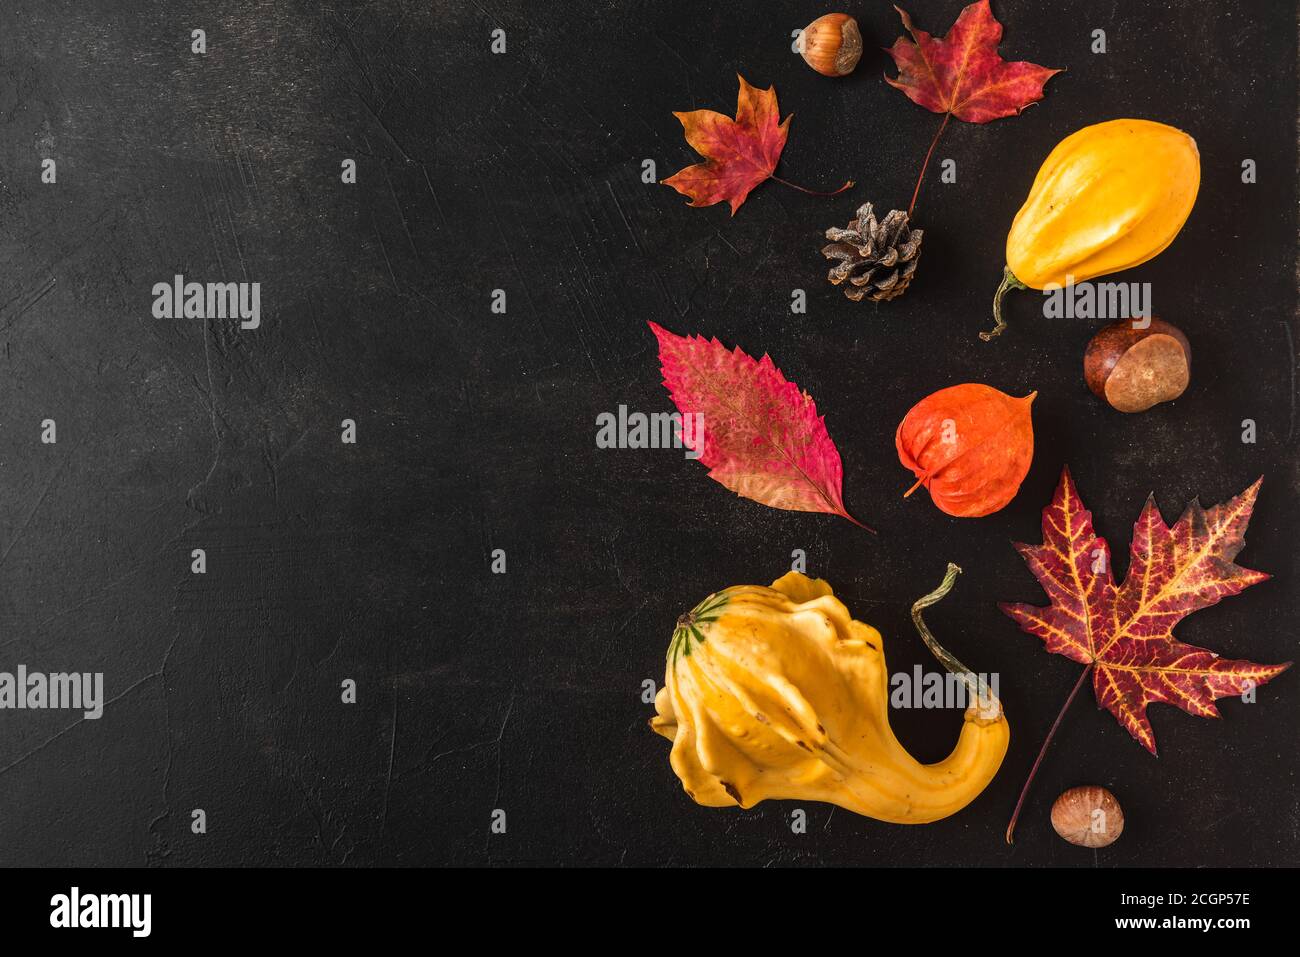 Autumn or thanksgiving background. Fall leaves, flowers, pumpkins and nuts on black background. Flat lay, top view with copy space Stock Photo